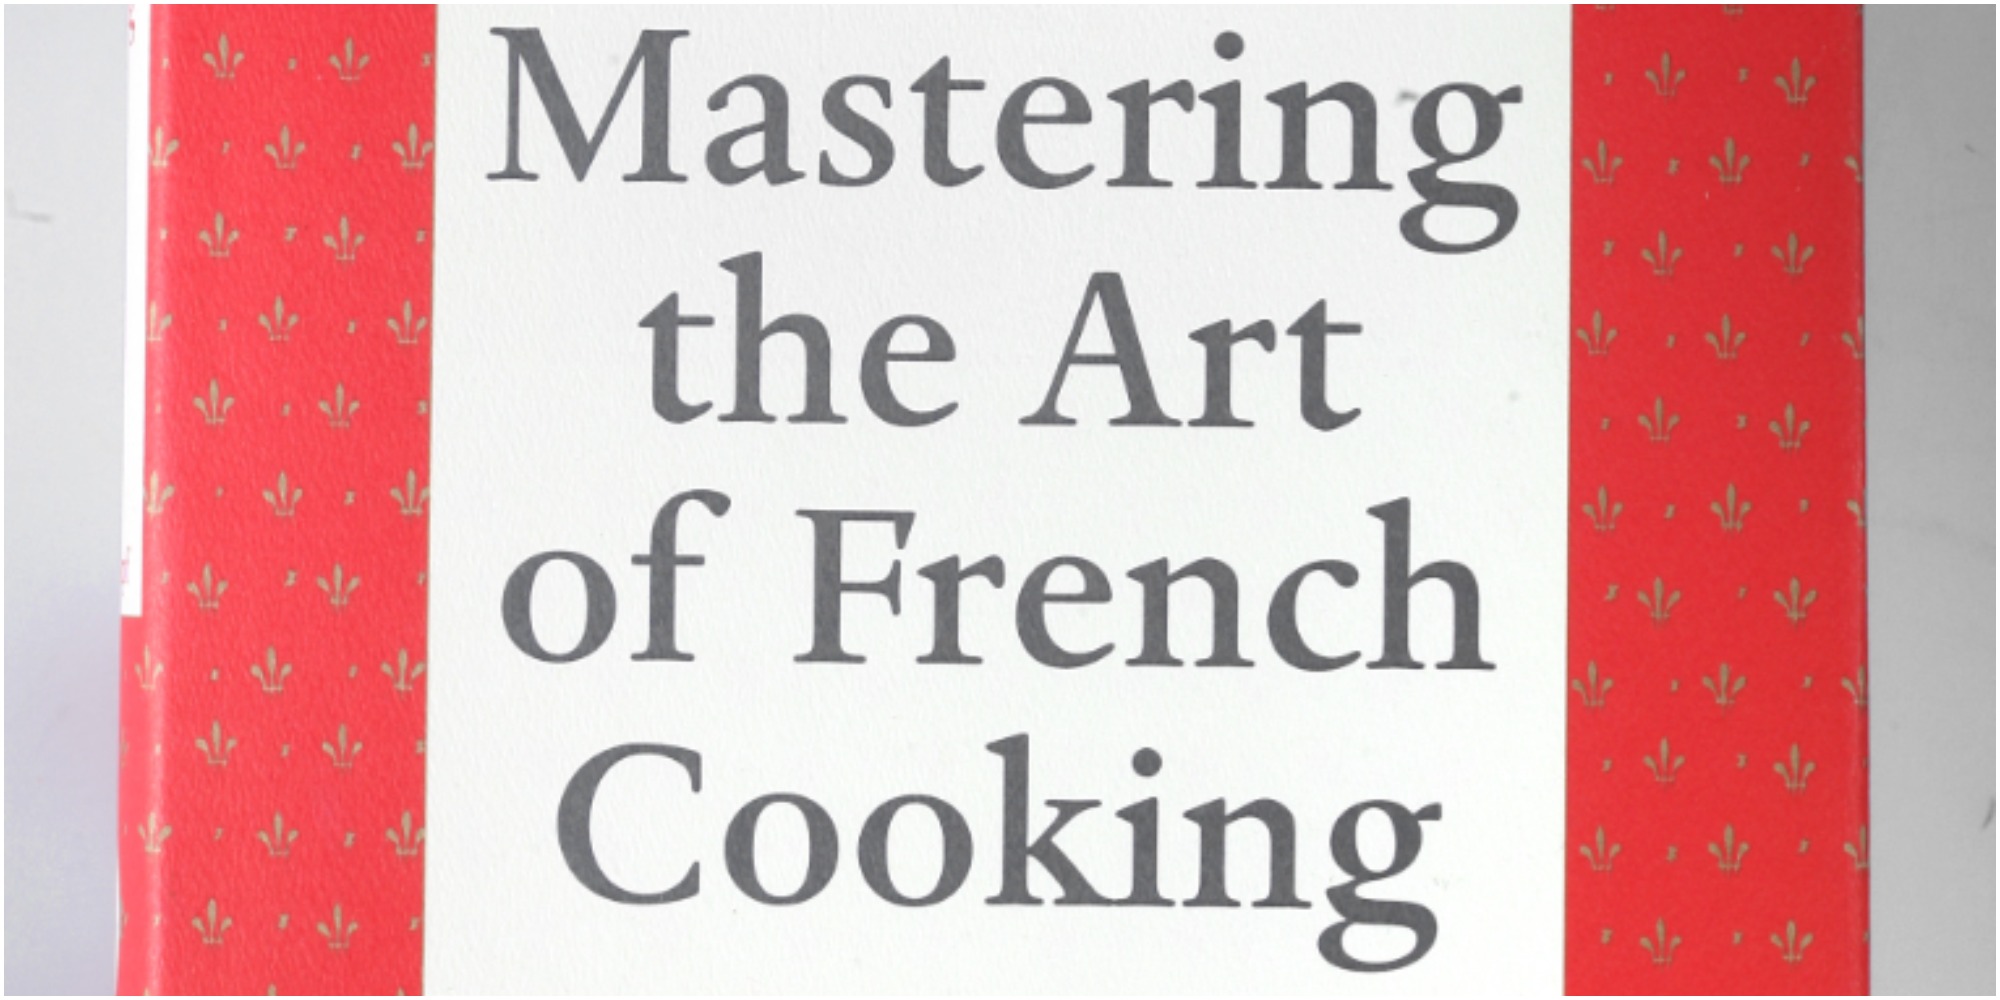 The cover art for Mastering the Art of French Cooking by Julia Child.